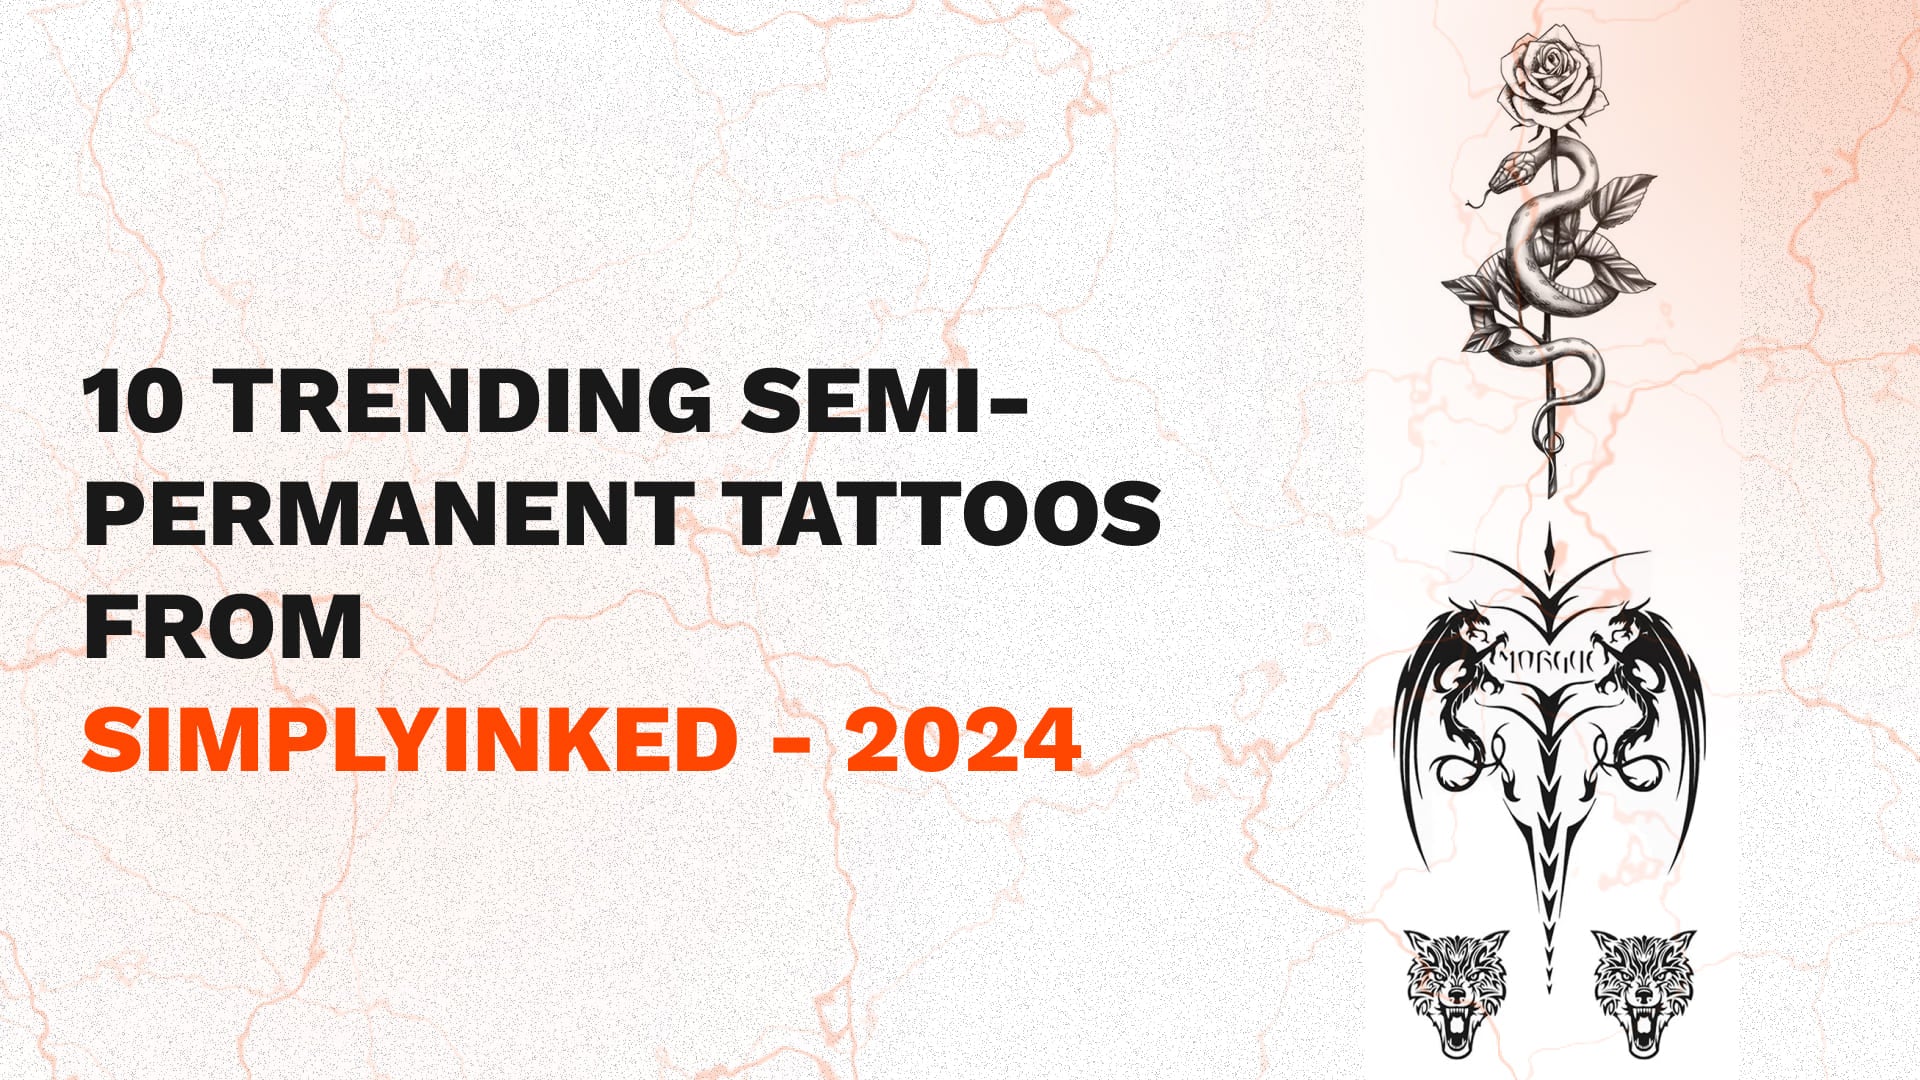 10 Trending Semi-Permanent Tattoos from Simply Inked - 2024